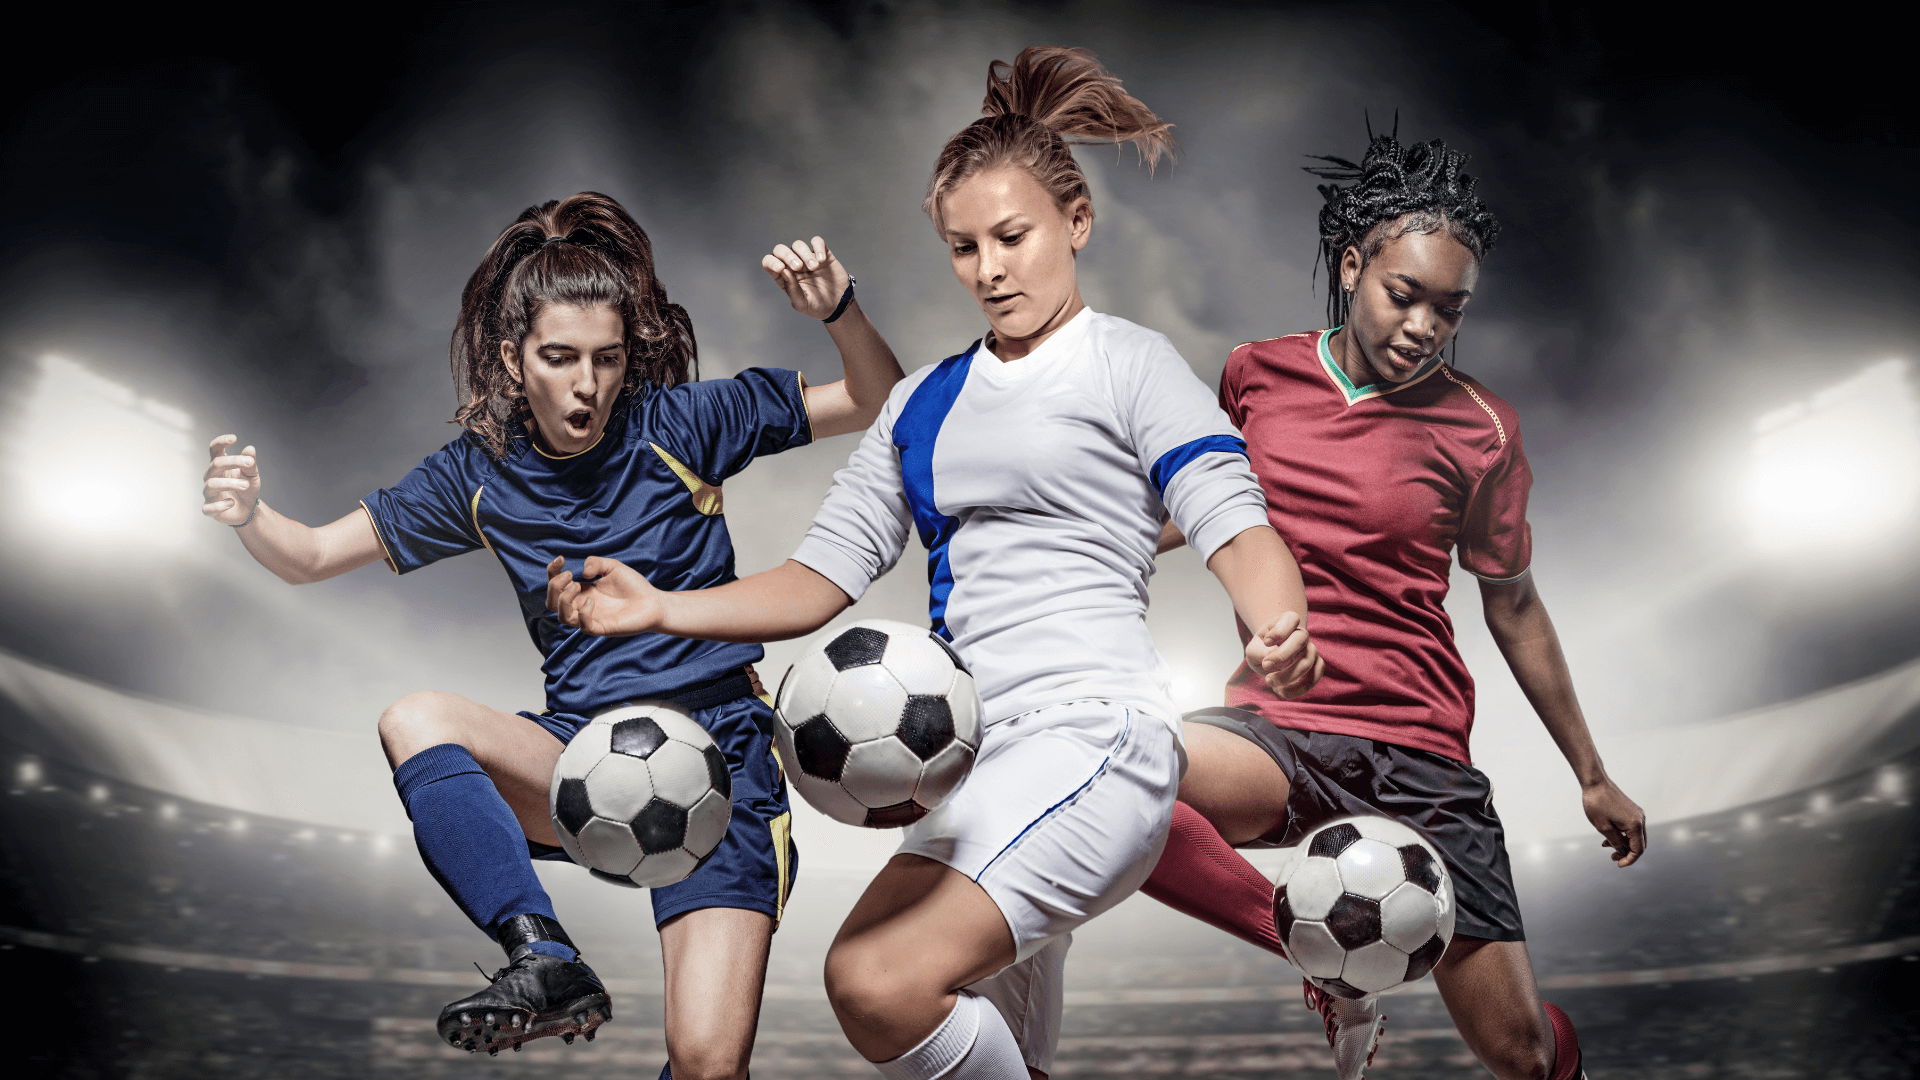 Women's Soccer: The Rise and Importance on the World Stage